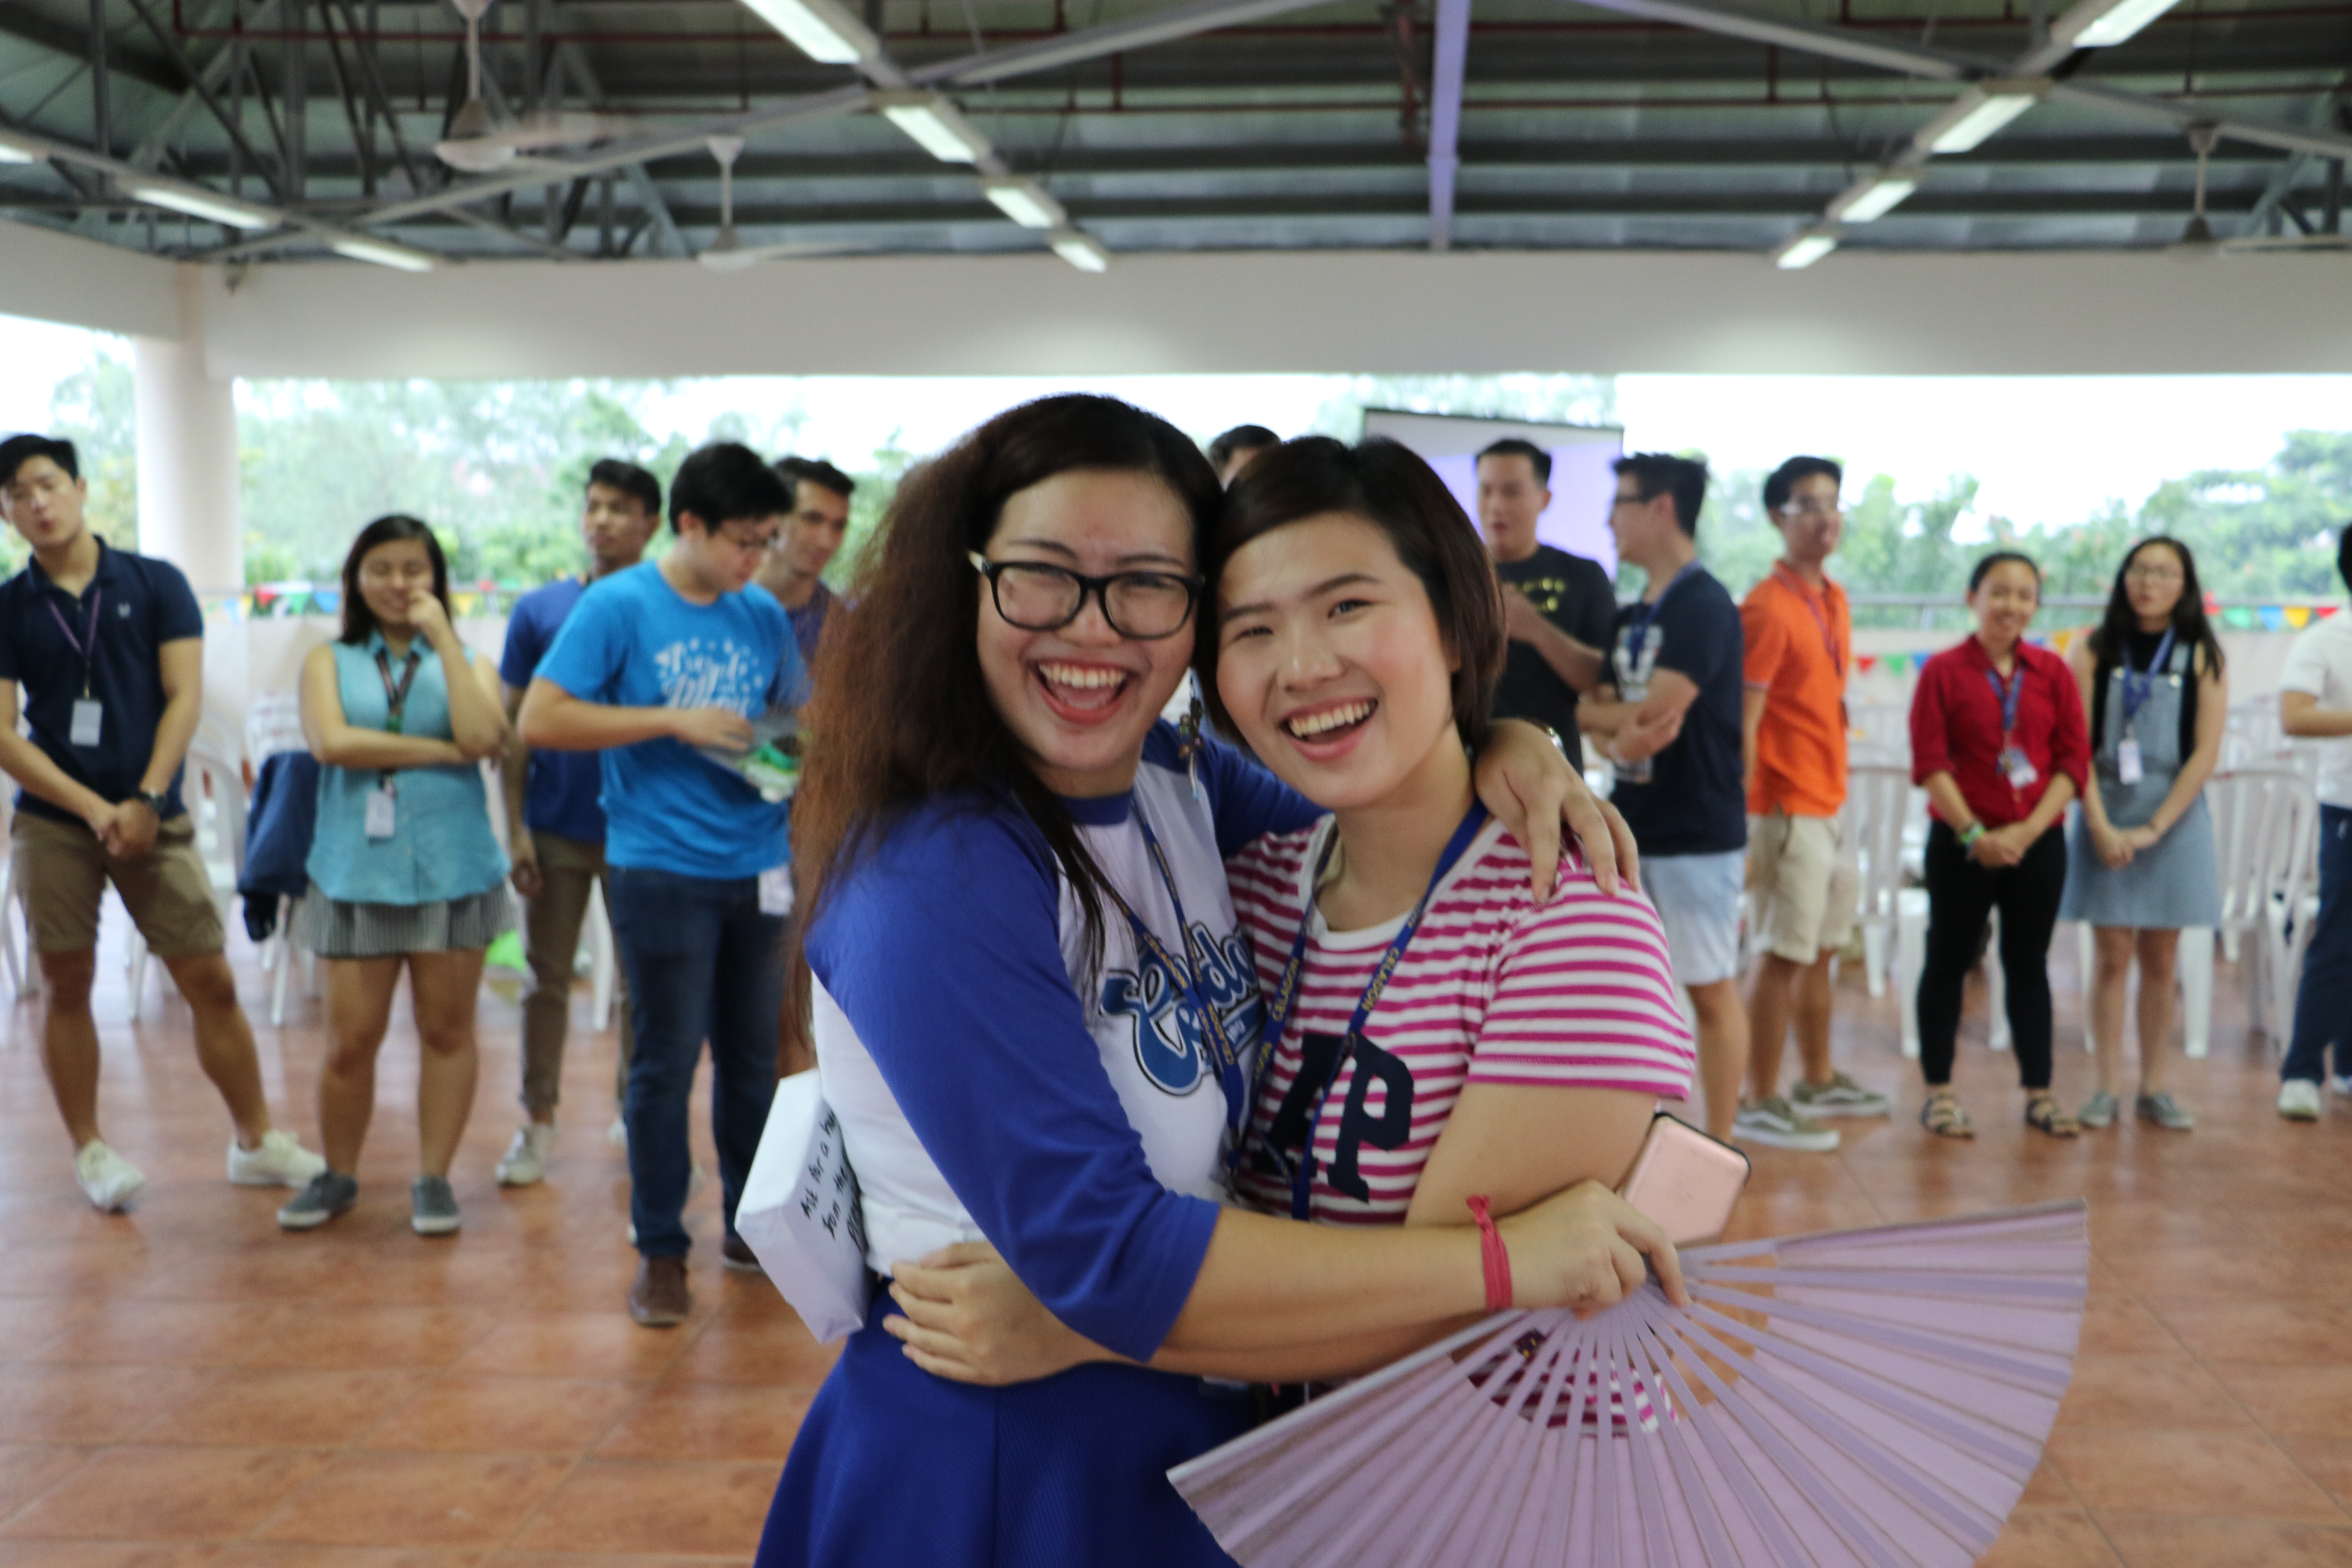 A Celadon member shares a warm welcoming hug from the President herself. Photo by Mark Yu.